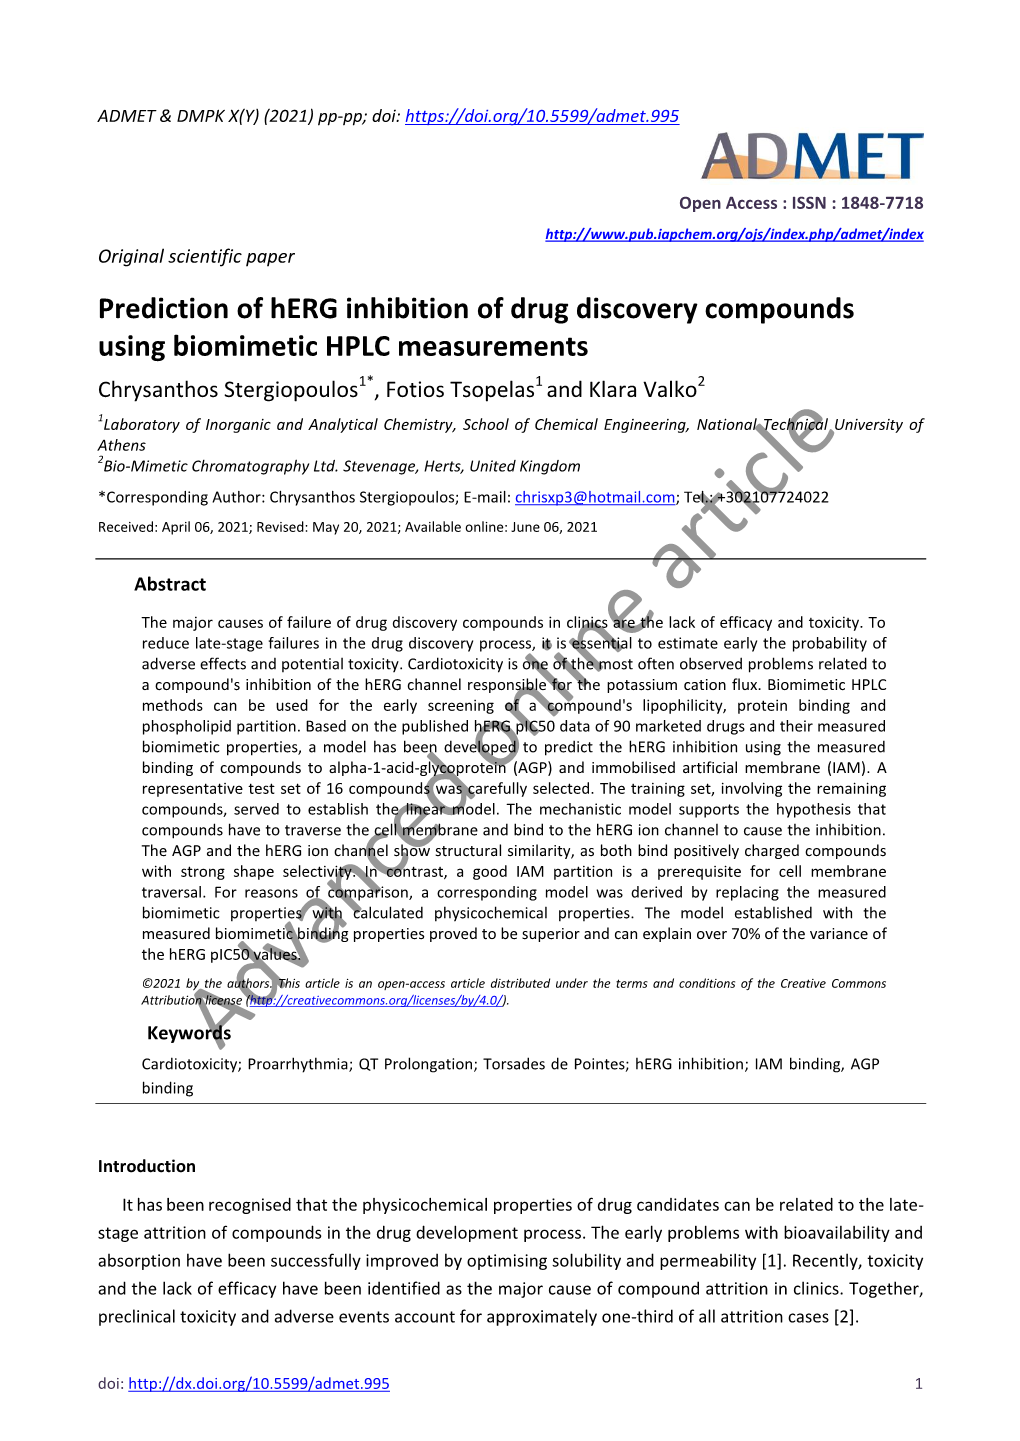 Prediction of Herg Inhibition of Drug Discovery Compounds Using